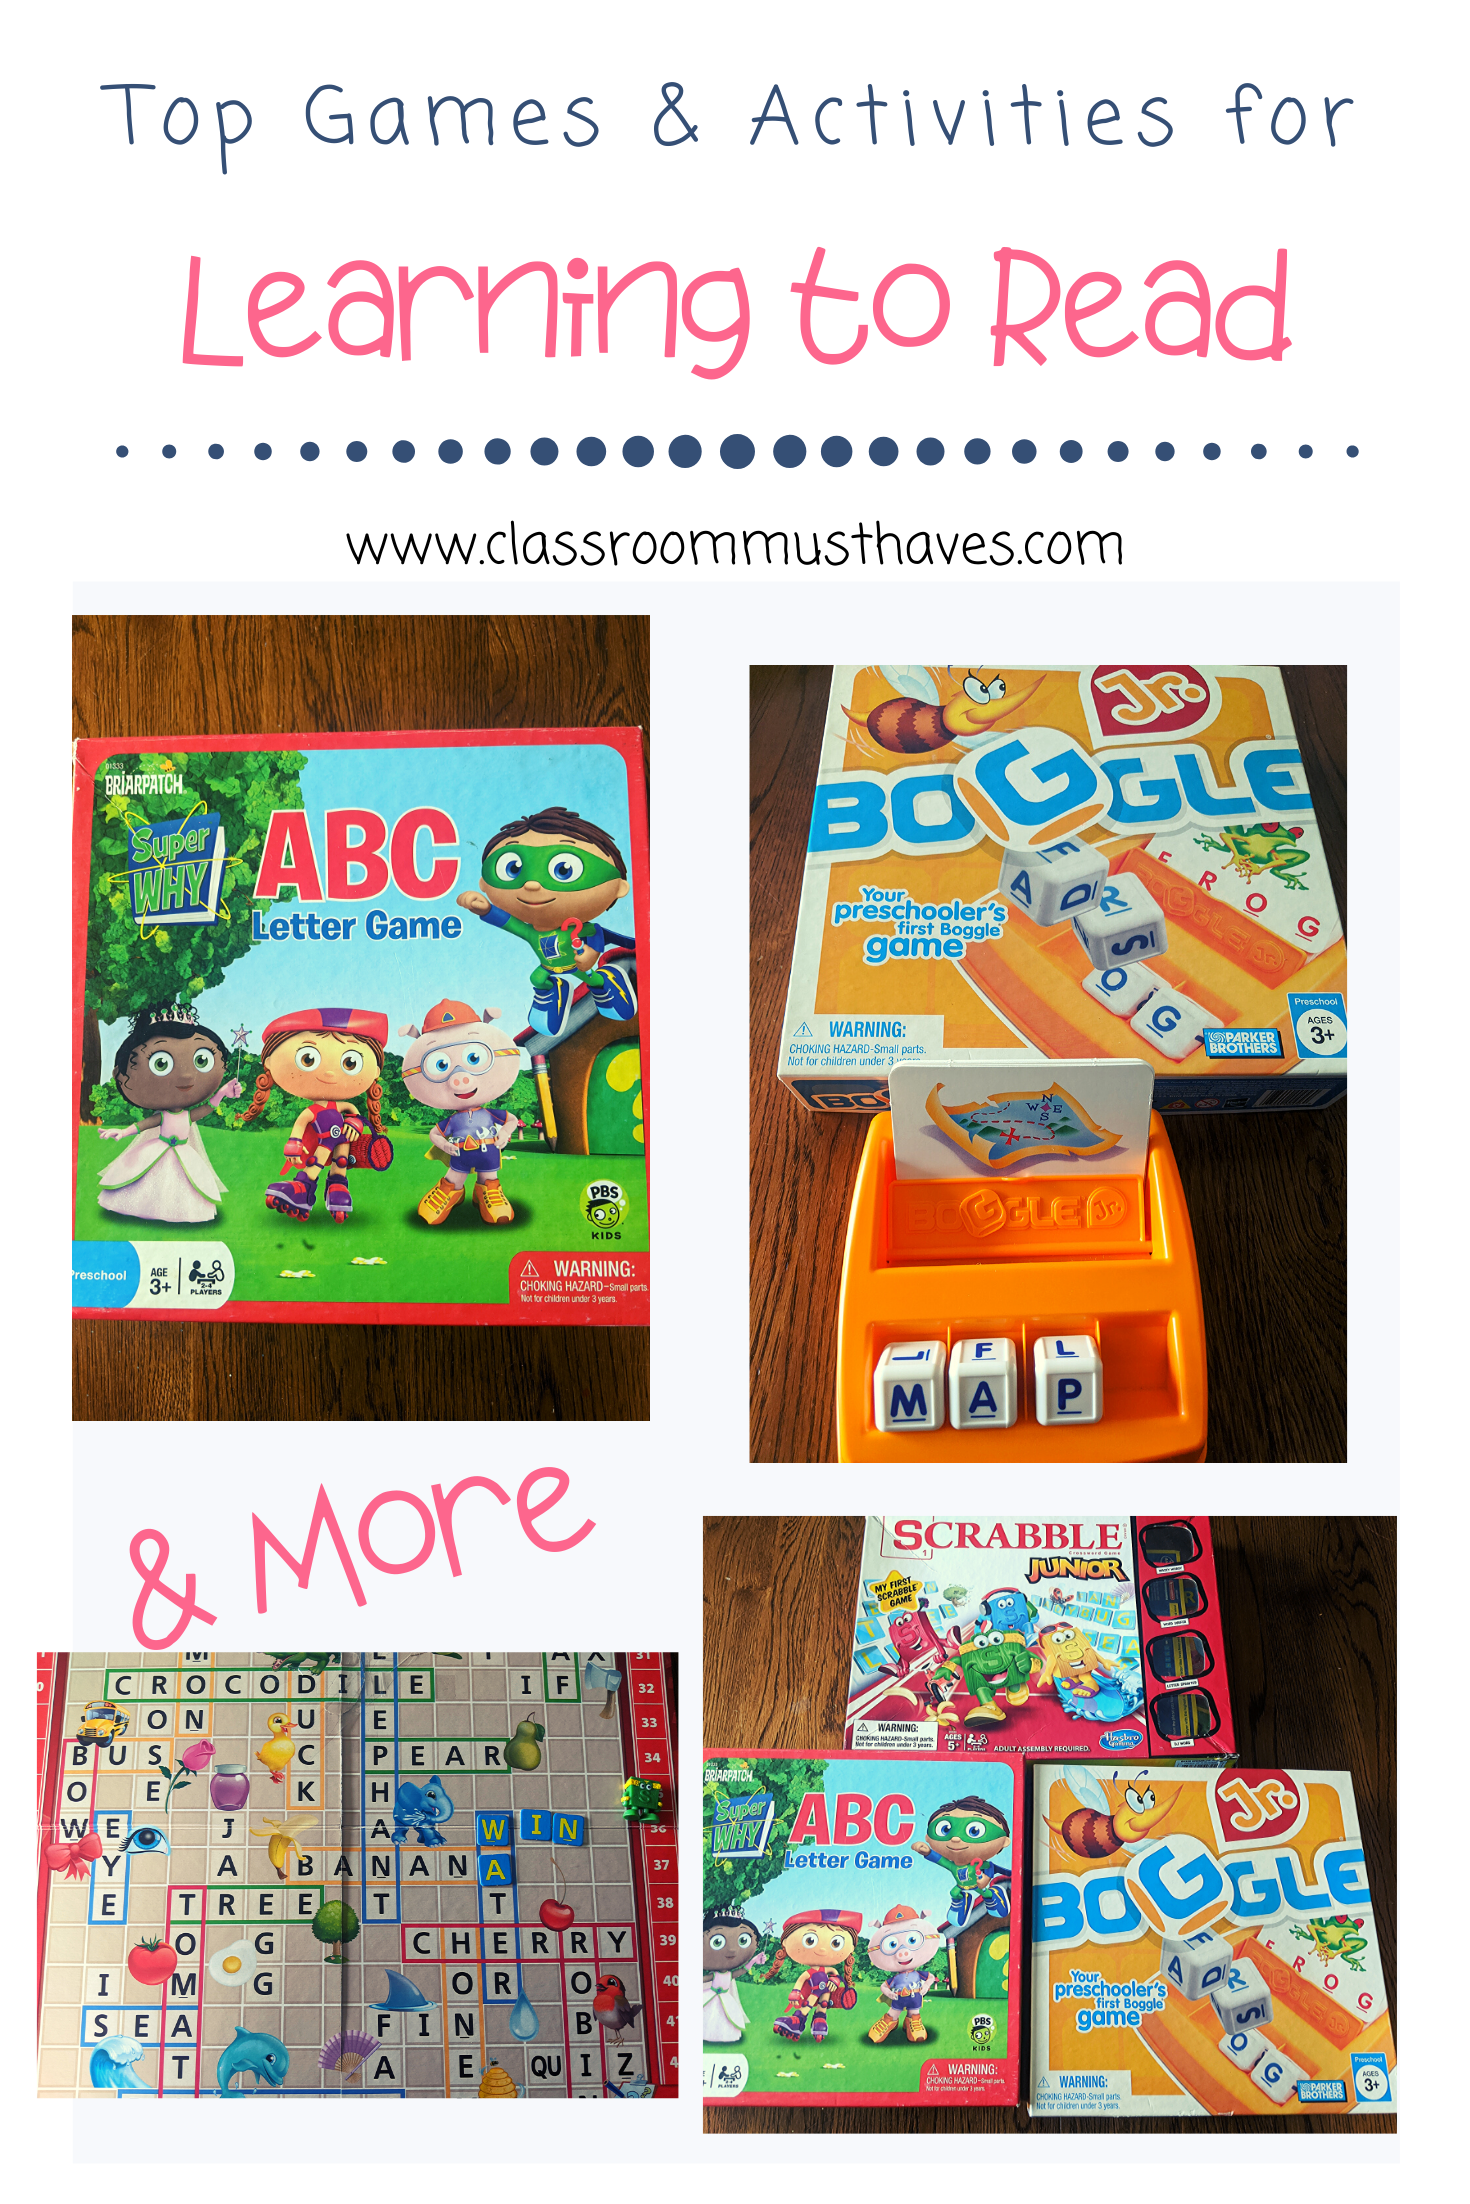 Top 8 fun, interactive, age-appropriate games to help your child learn their letters, sounds, and more! via @classroommusthaves